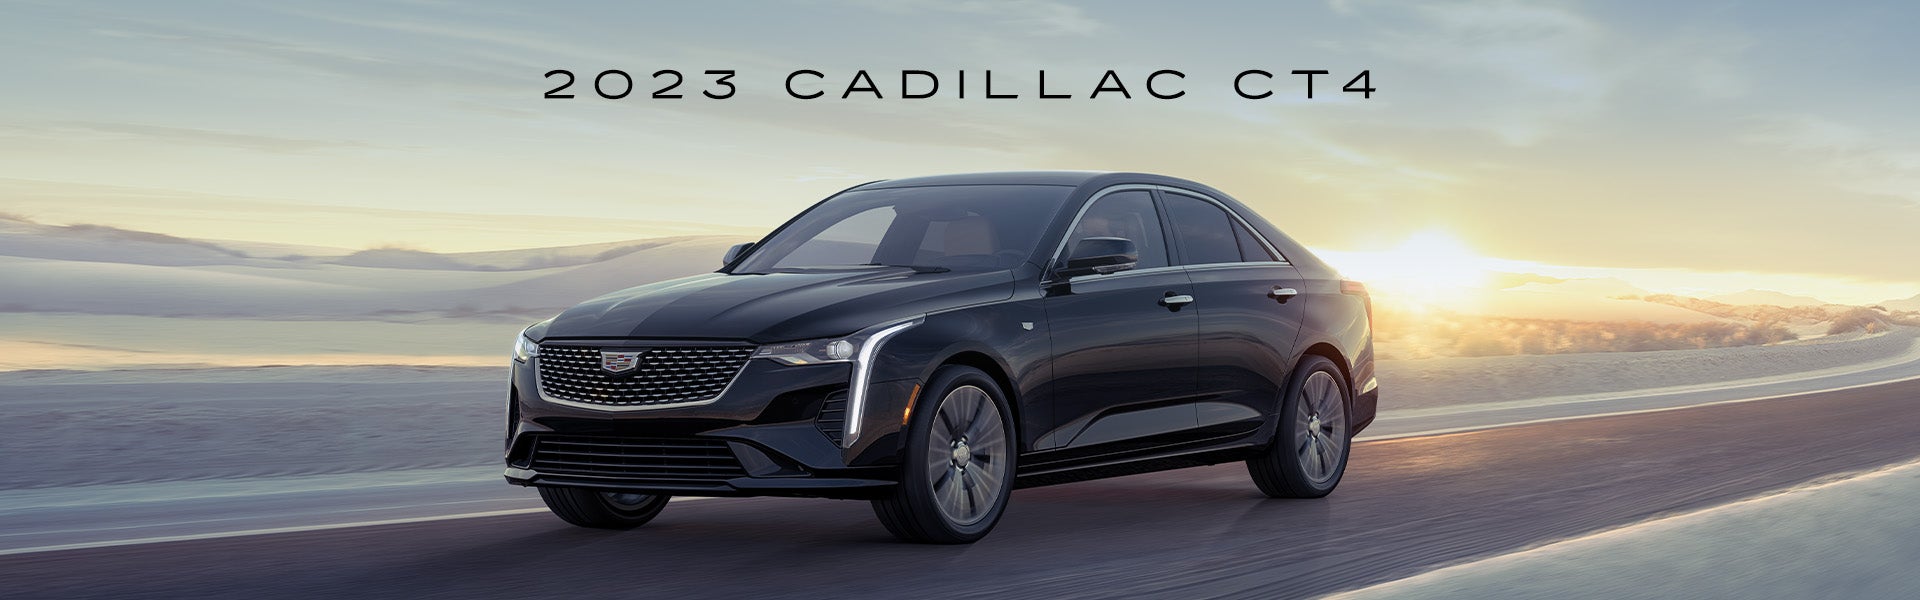 2023 Cadillac CT4 in Greer SC